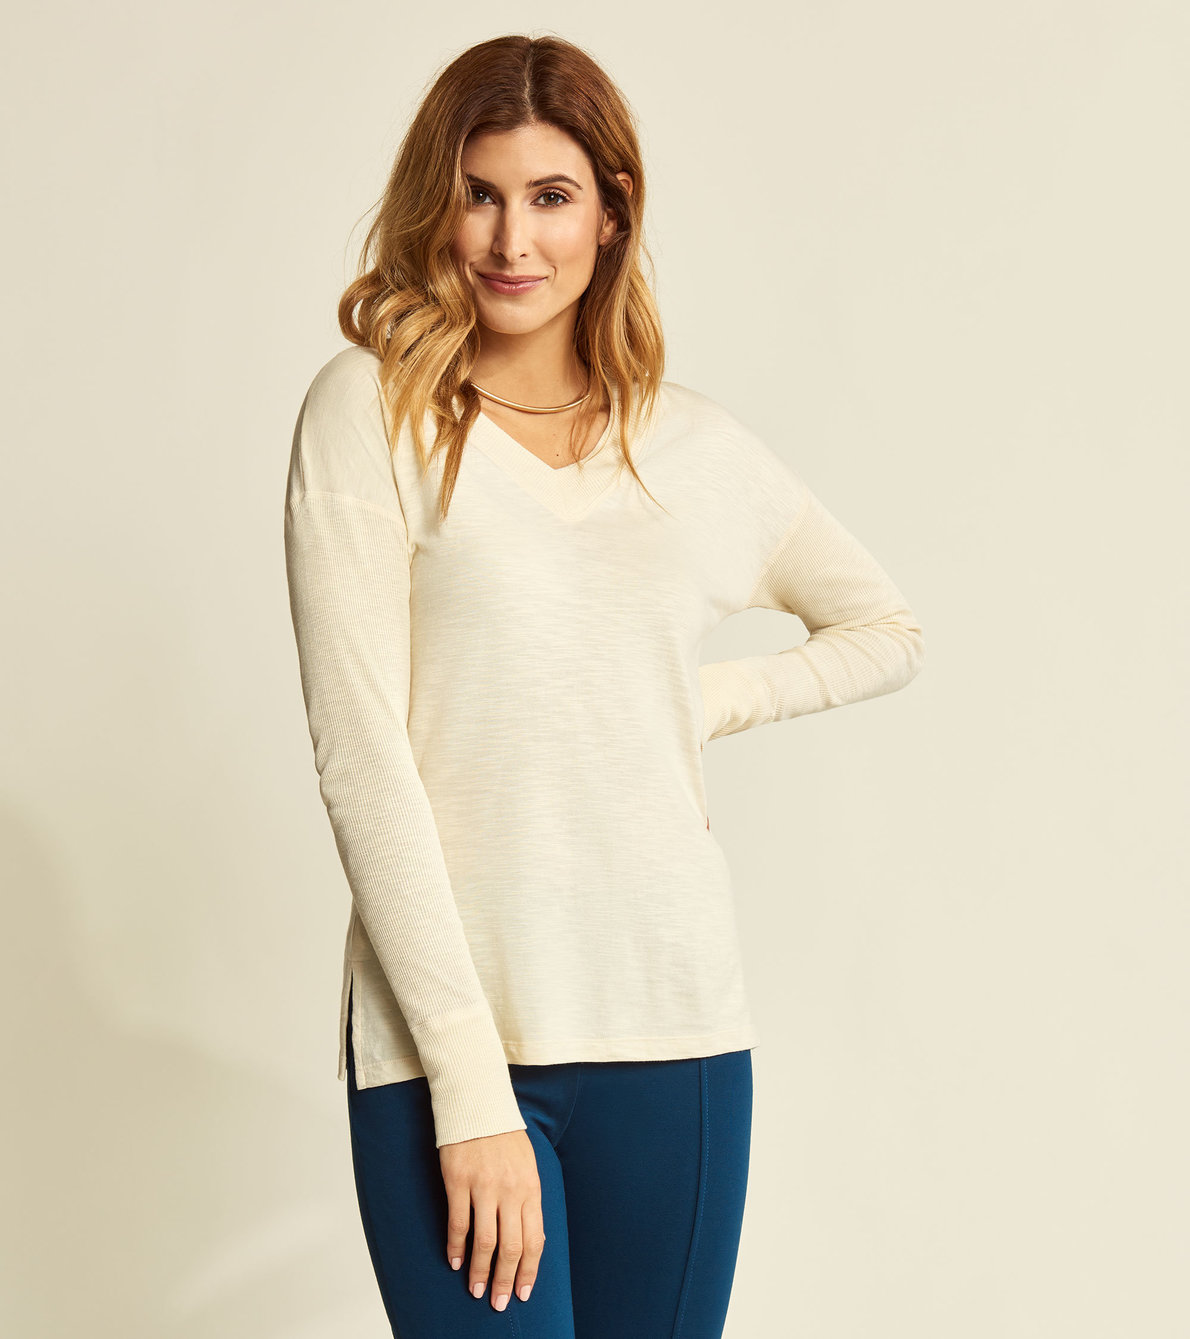 View larger image of Amber V Neck Top - Light Yellow